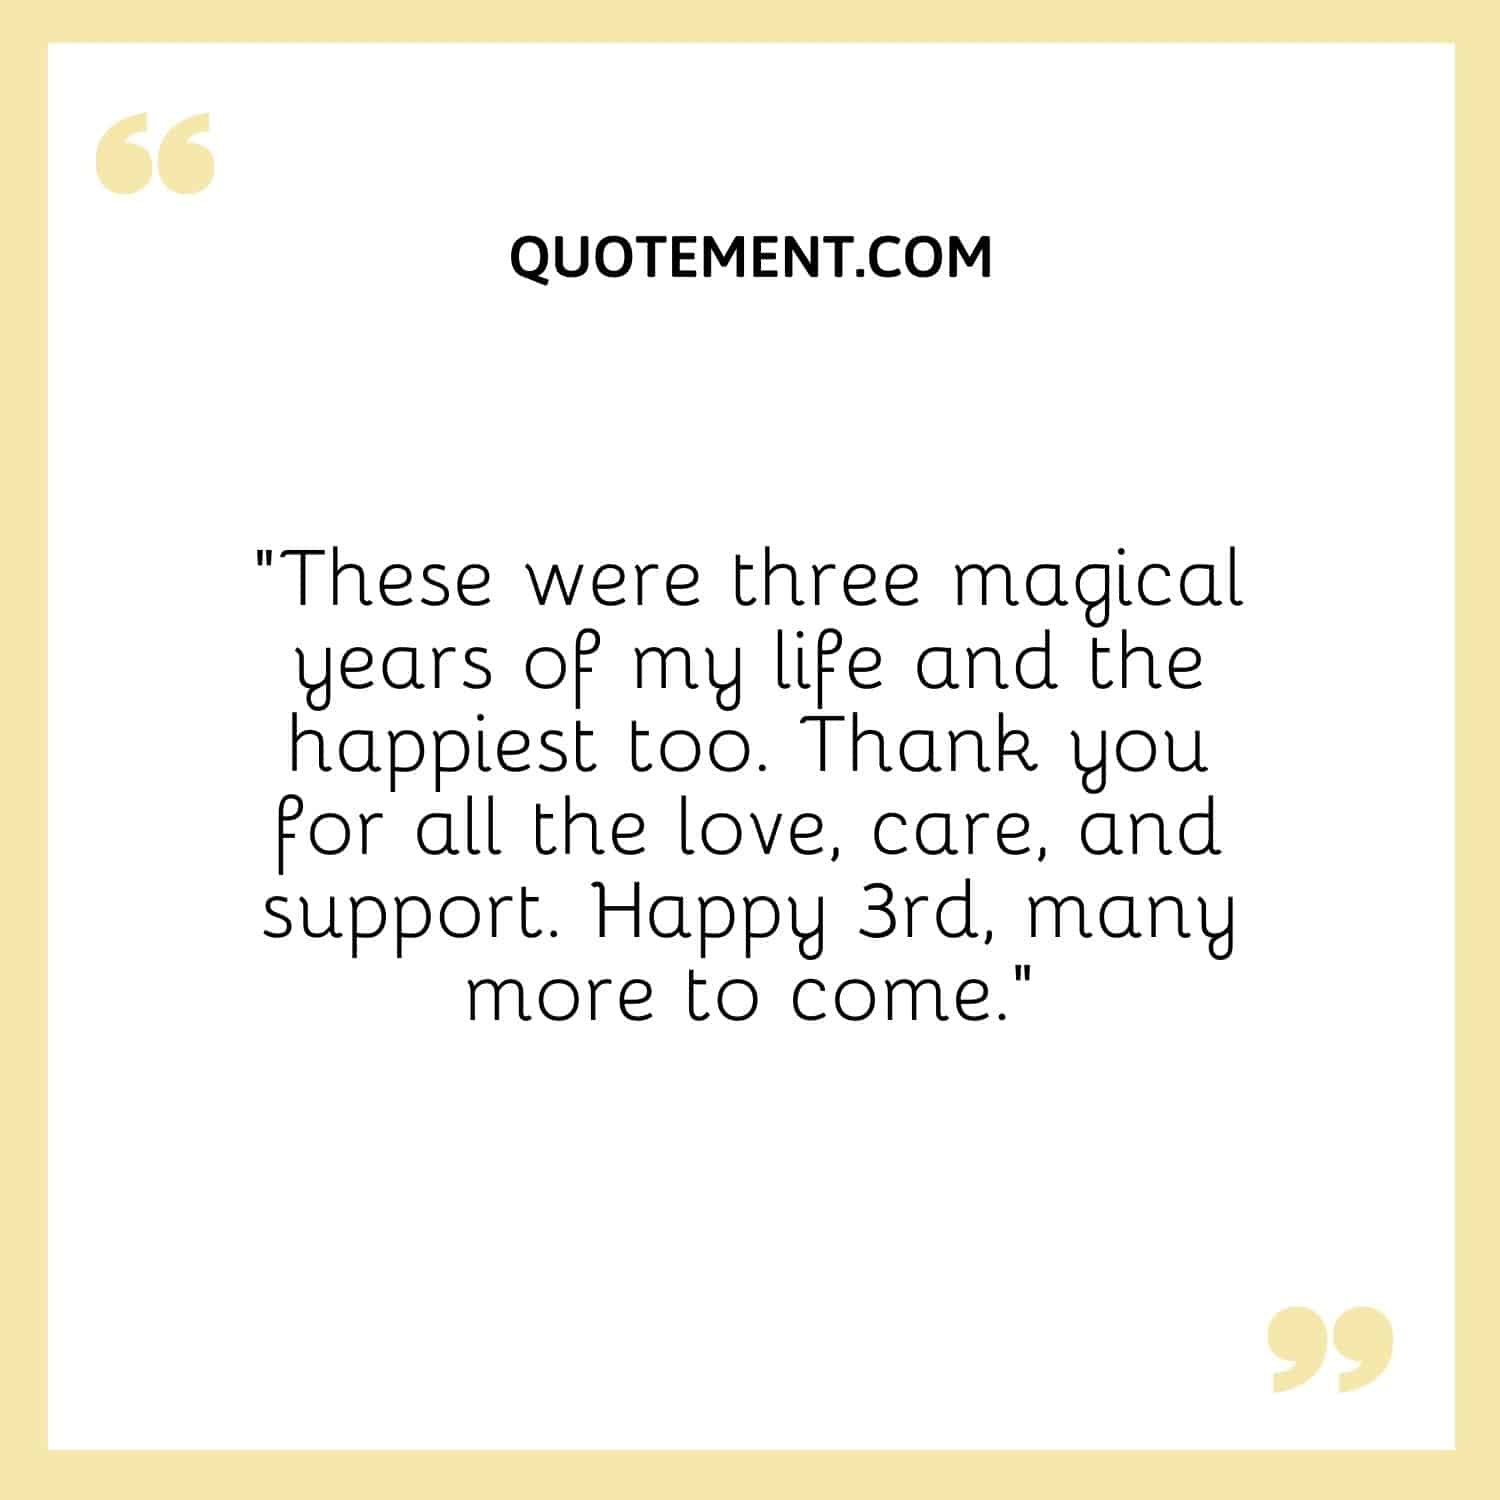 “These were three magical years of my life and the happiest too. Thank you for all the love, care, and support. Happy 3rd, many more to come.”